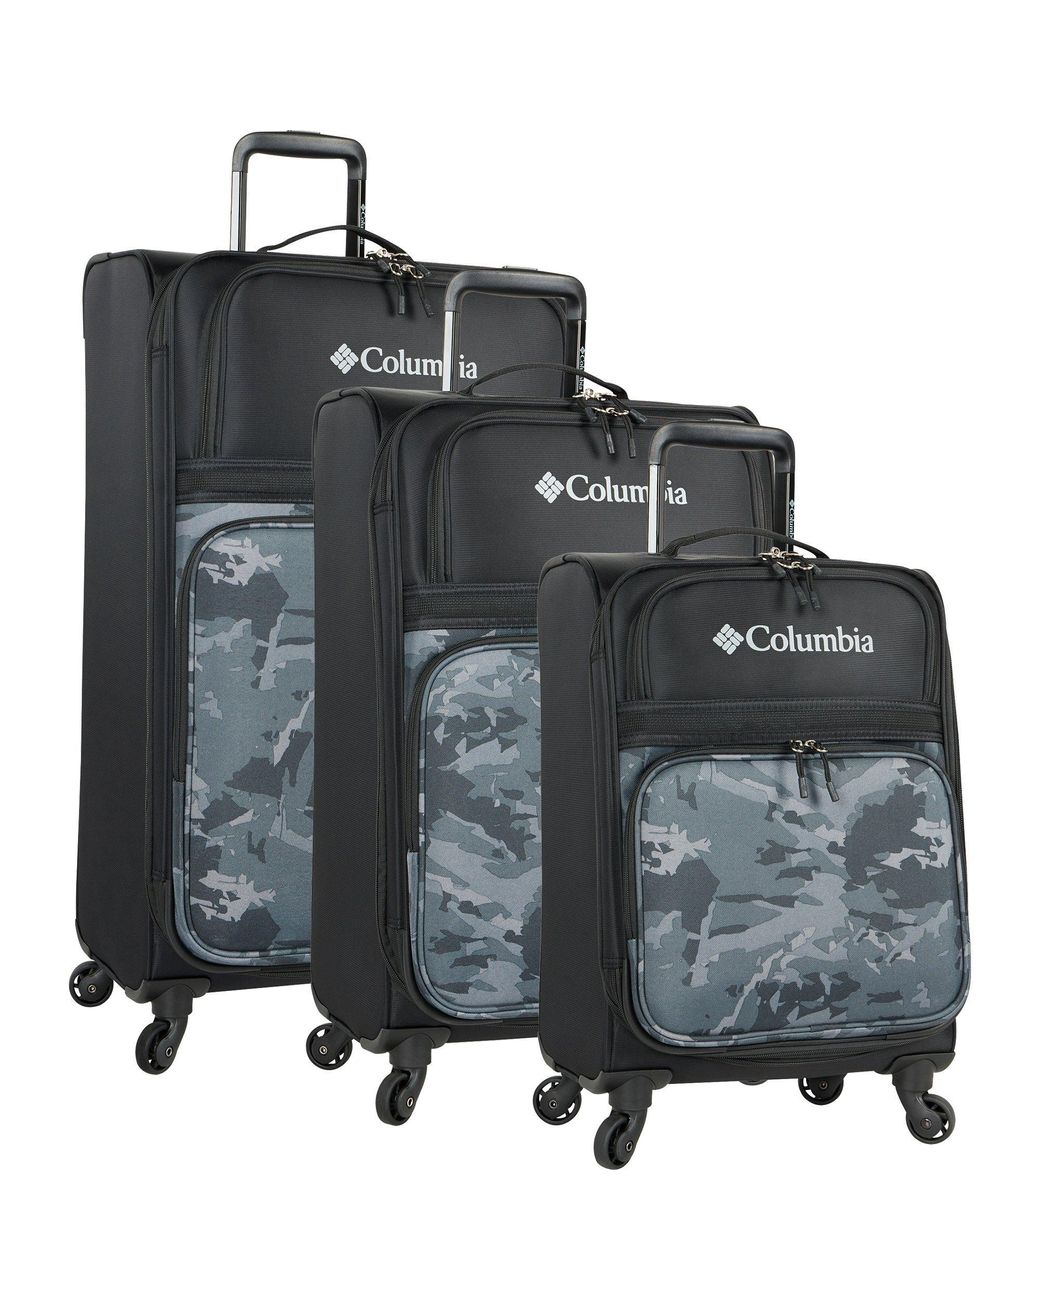 The Camo Collection 3 Piece Expandable Hardside Spinner Luggage